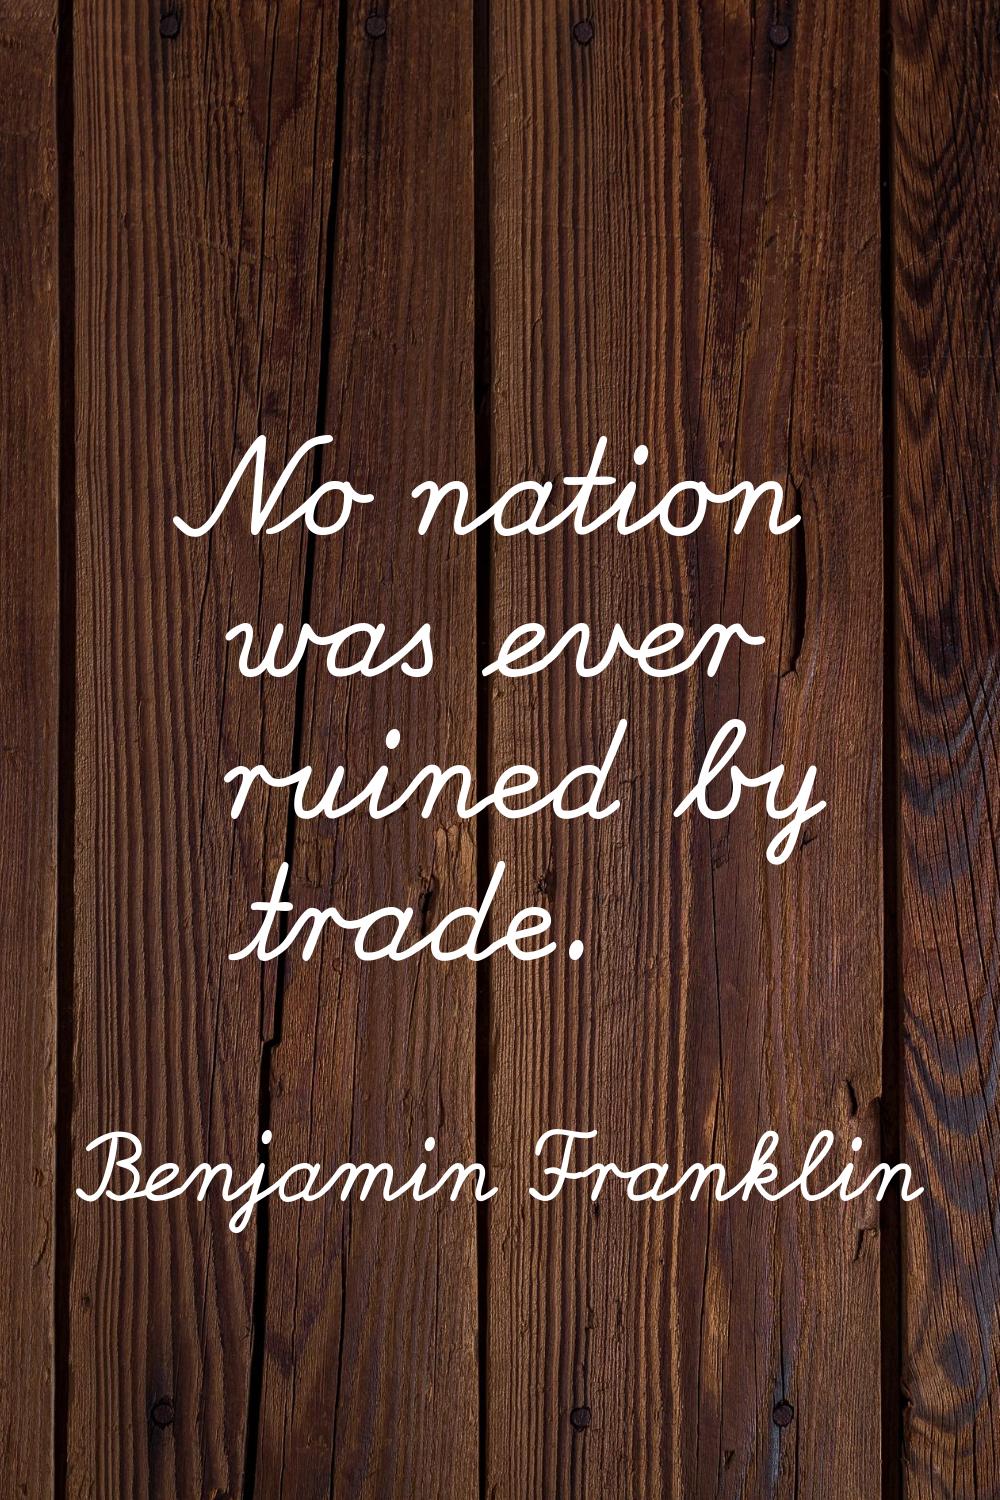 No nation was ever ruined by trade.